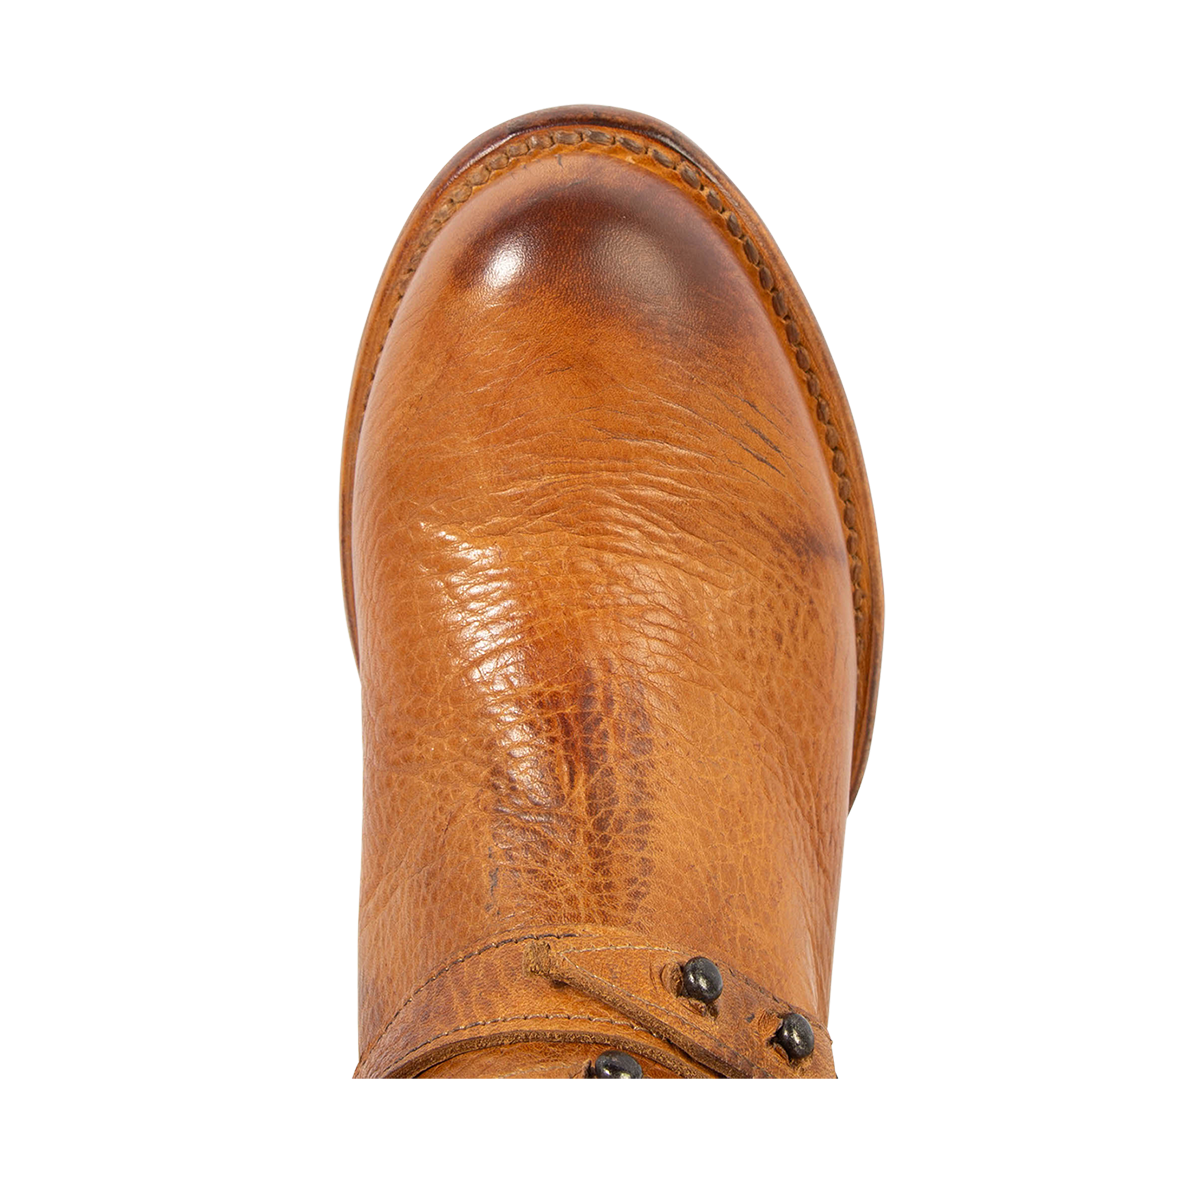 Top view showing round toe on FREEBIRD women's Rory wheat leather boot